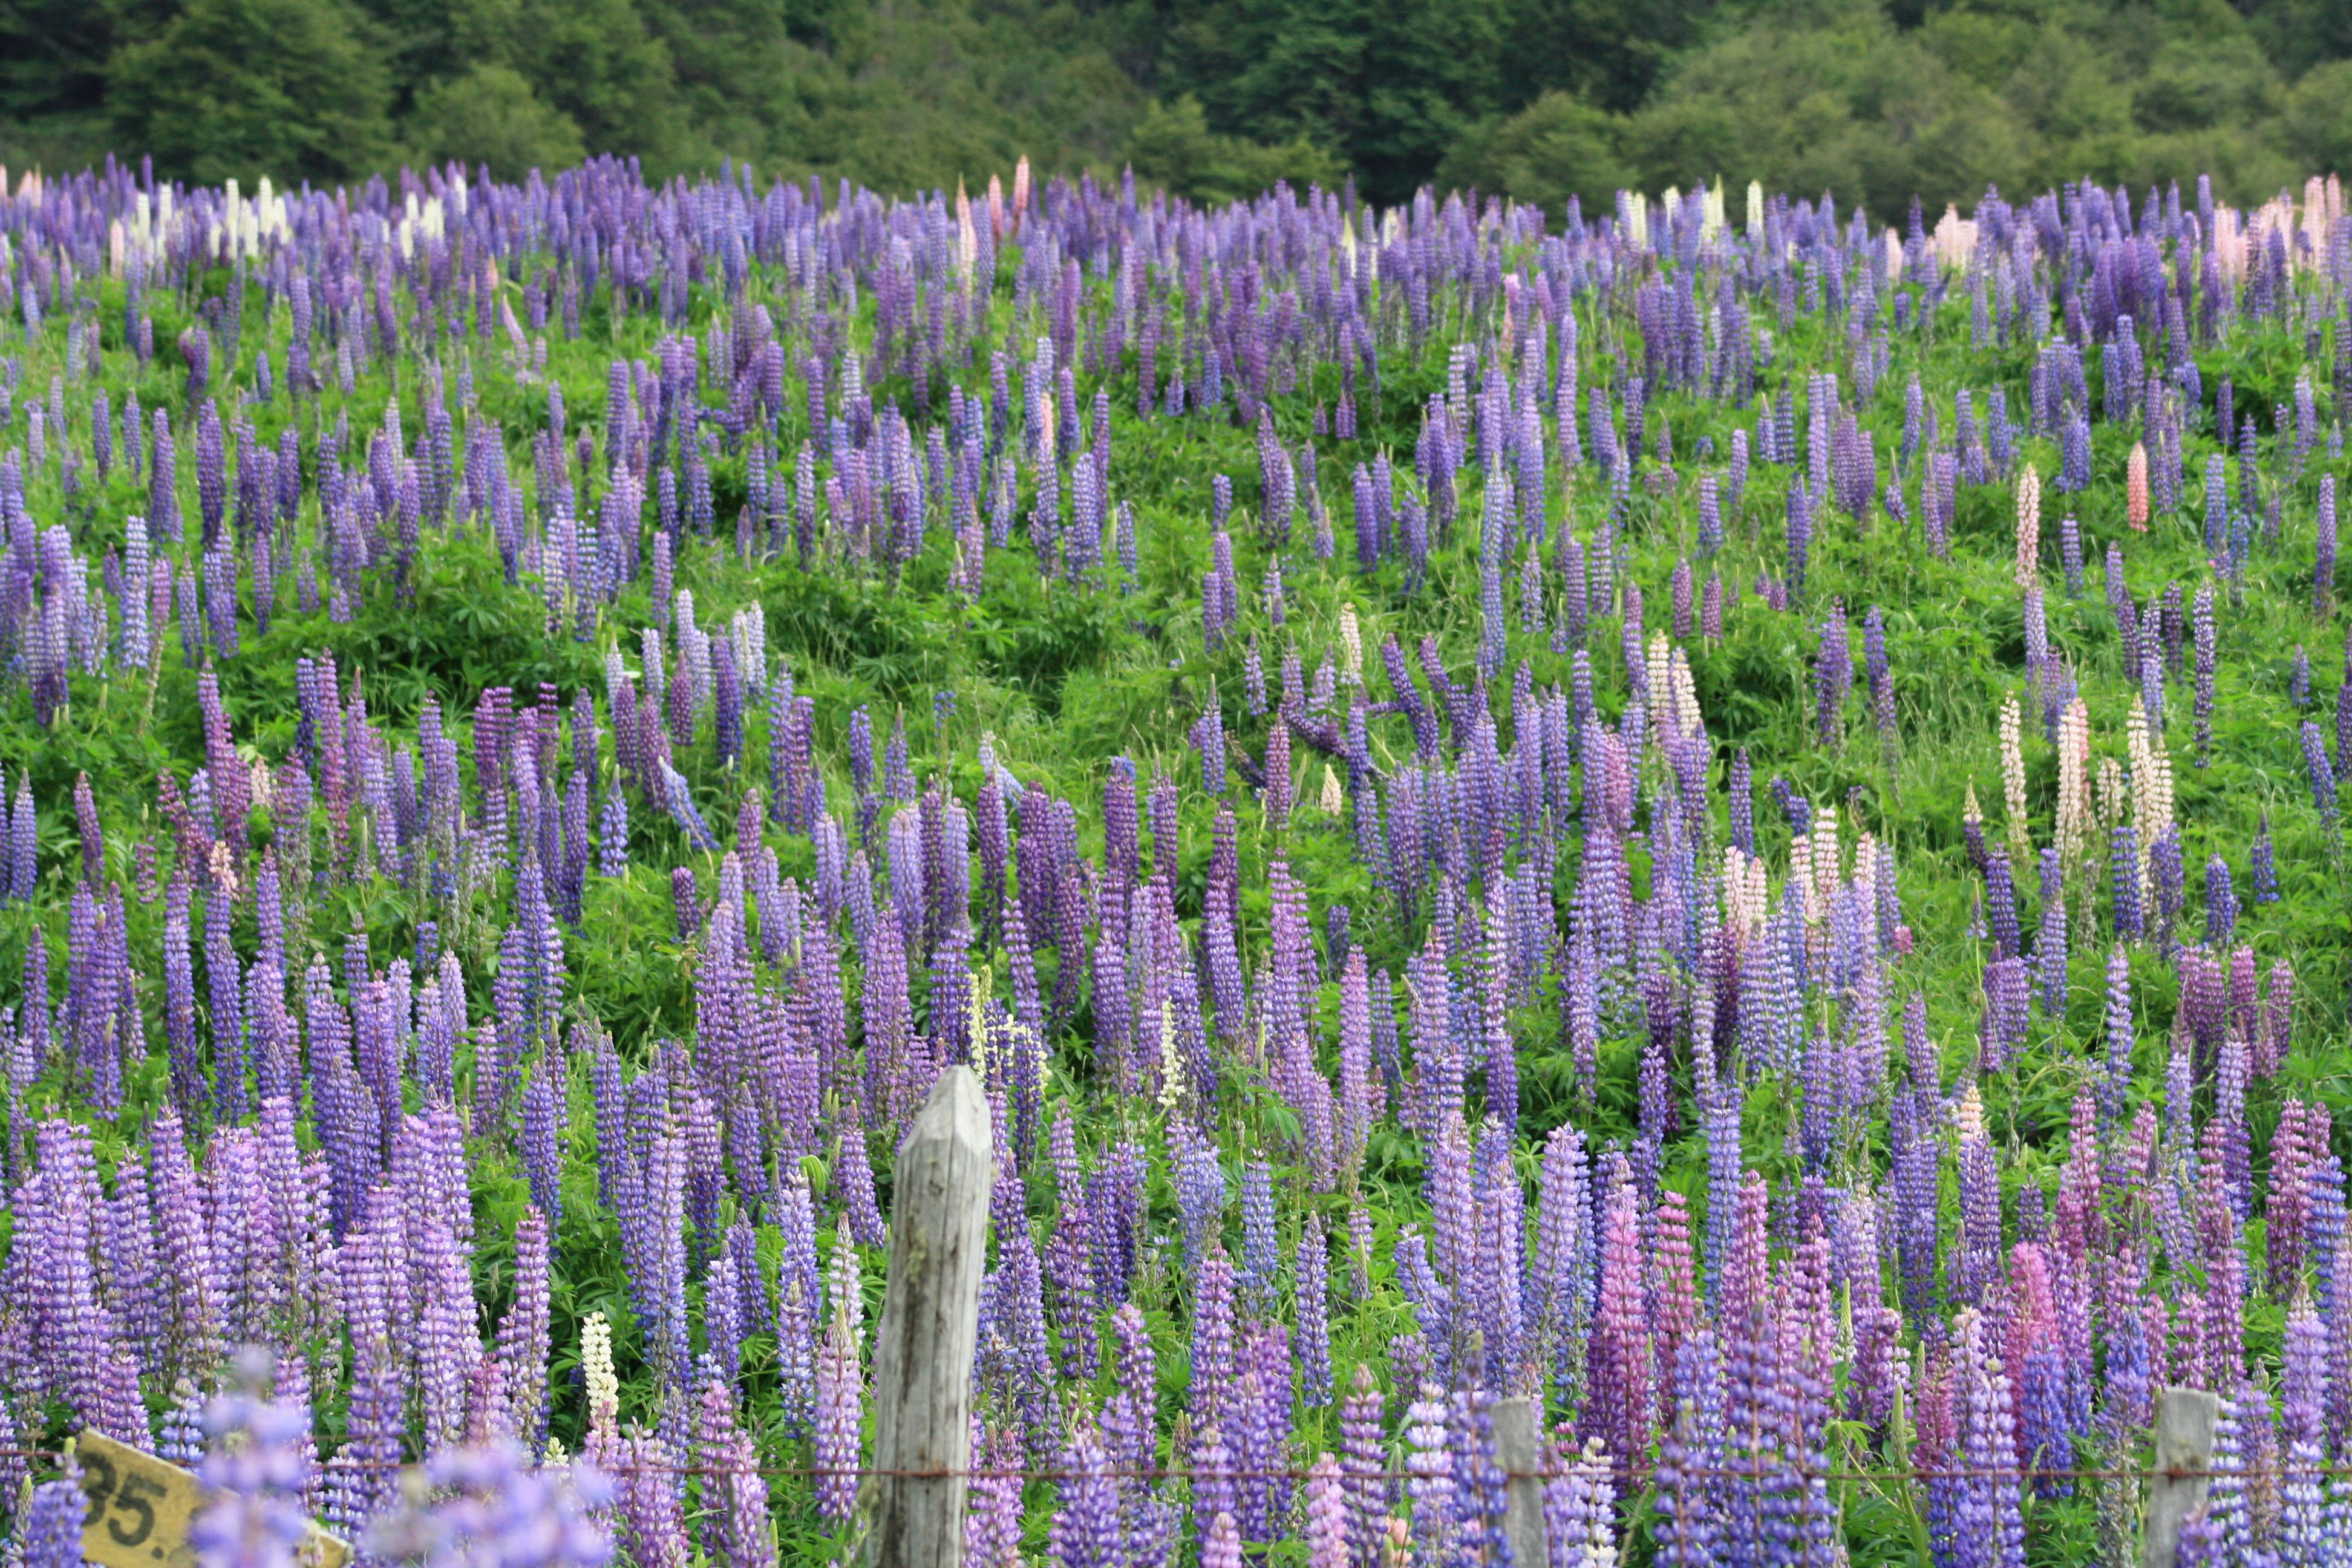 Lupine blooms can be seen throughout the landscape along the Carretera Austral © Carolyn McCarthy 